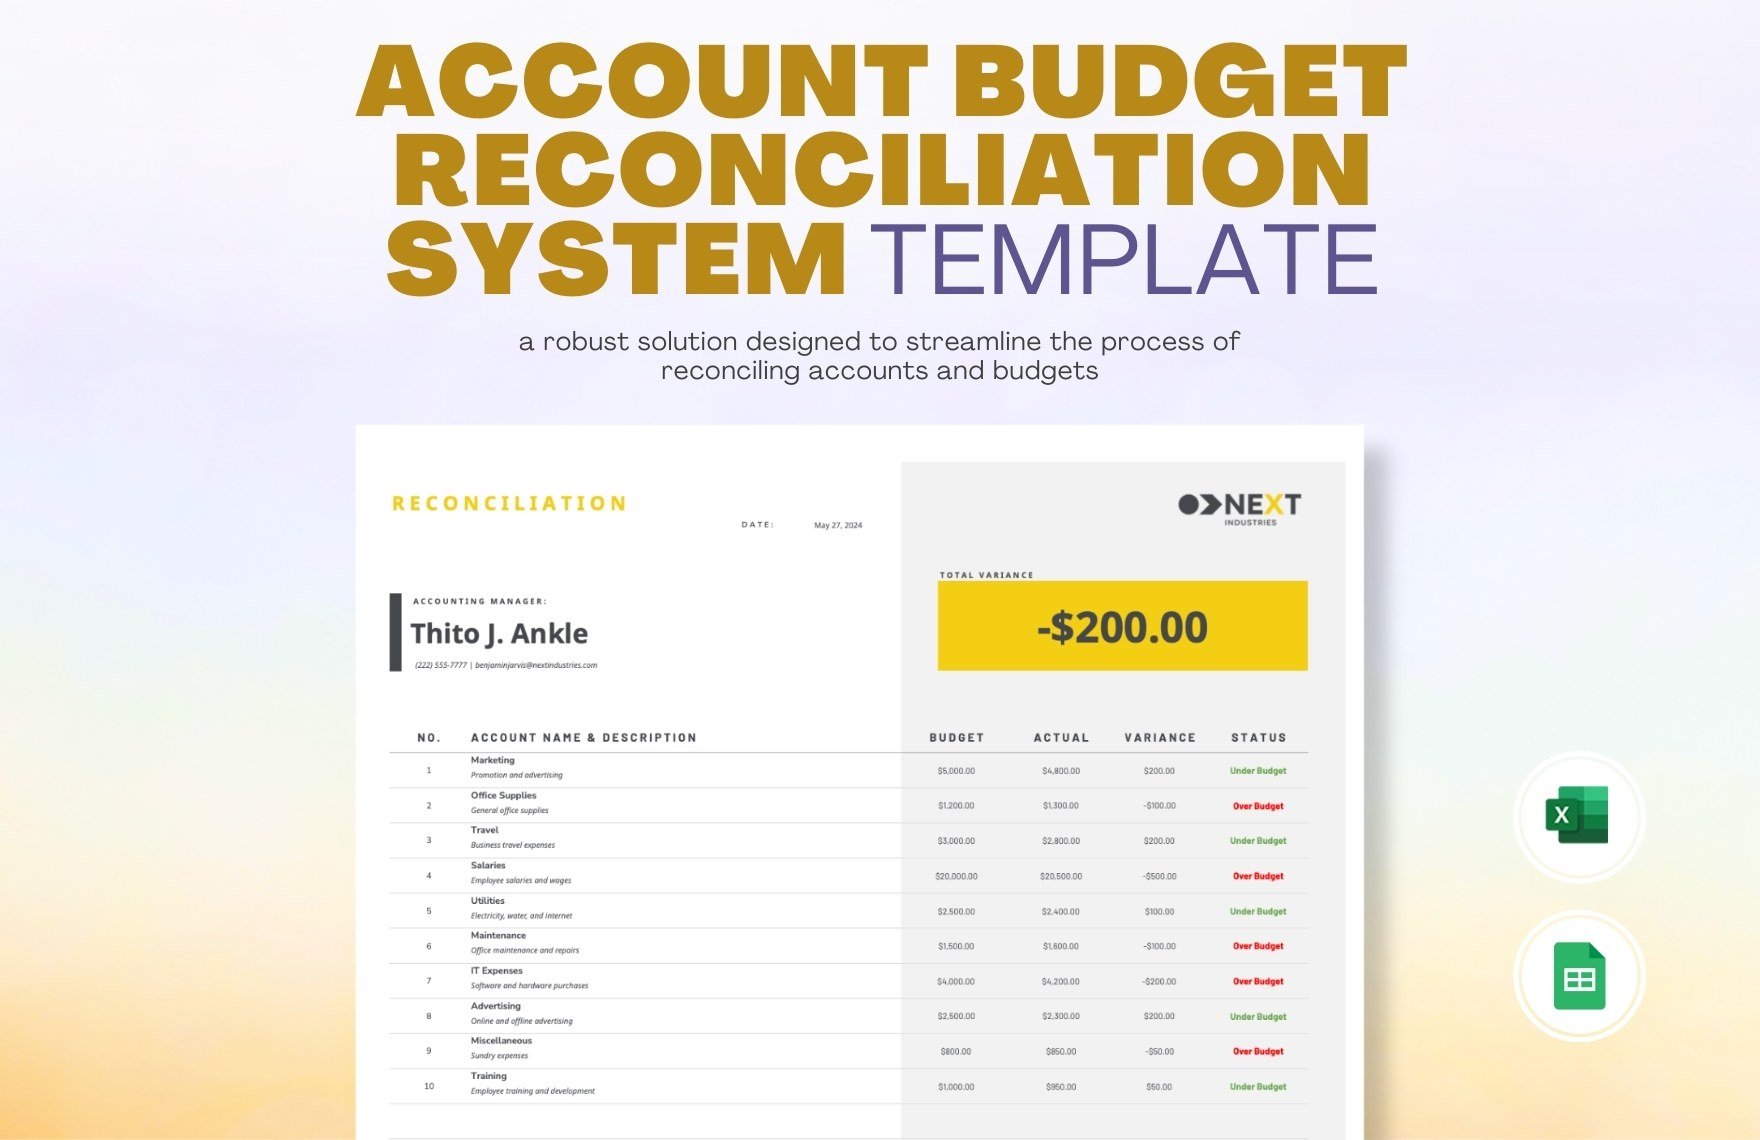 Account Budget Reconciliation System Template in Excel, Google Sheets